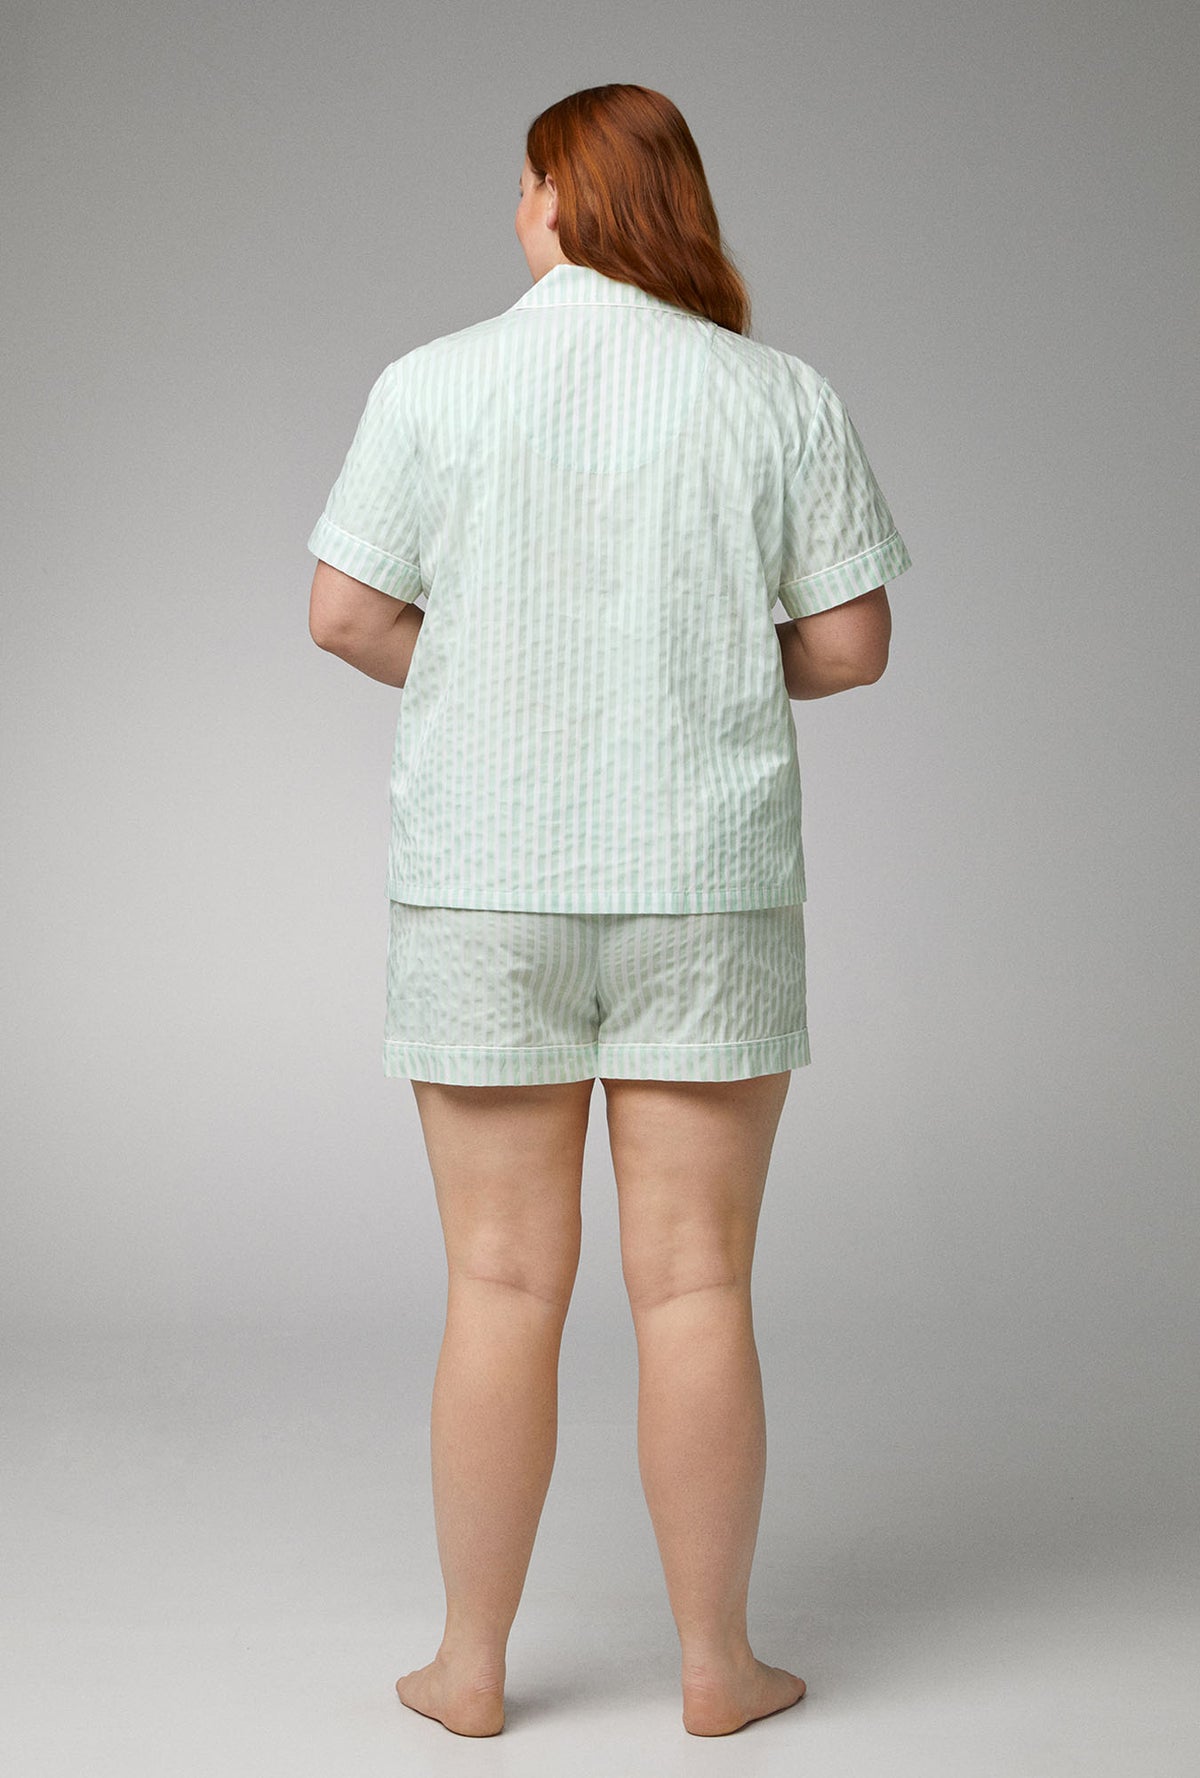 A lady wearing green Short Sleeve Classic Woven Cotton Sateen Shorty PJ Set with Mint 3D Stripe print